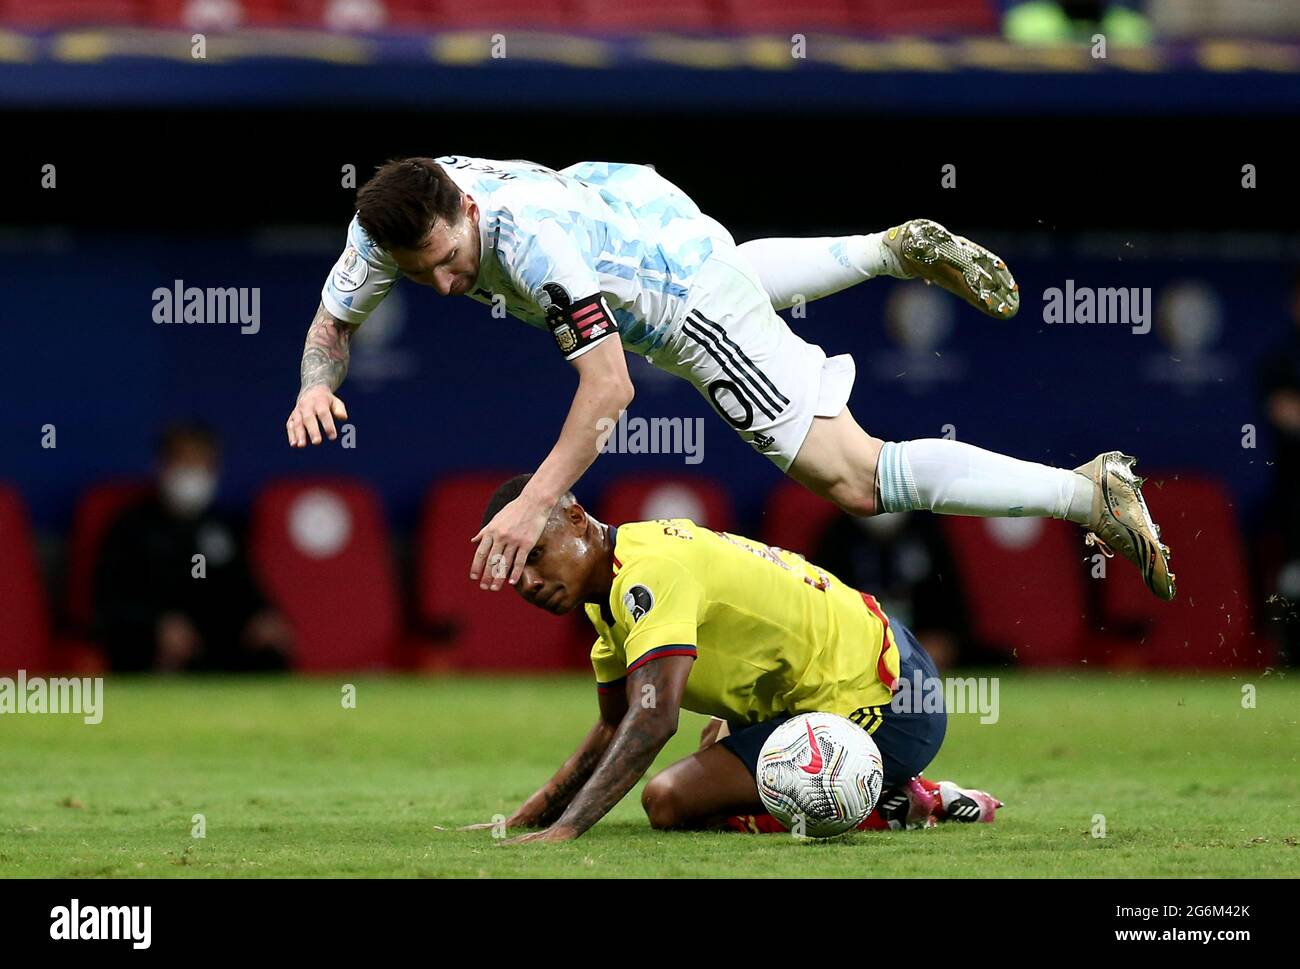 BRASILIA, BRAZIL - JULY 06: Lionel Messi of Argentina competes for the ball with Wilmar Barrios of Colombia ,during the Semifinal match between Argentina and Colombia as part of Conmebol Copa America Brazil 2021 at Mane Garrincha Stadium on July 6, 2021 in Brasilia, Brazil. (MB Media) Stock Photo